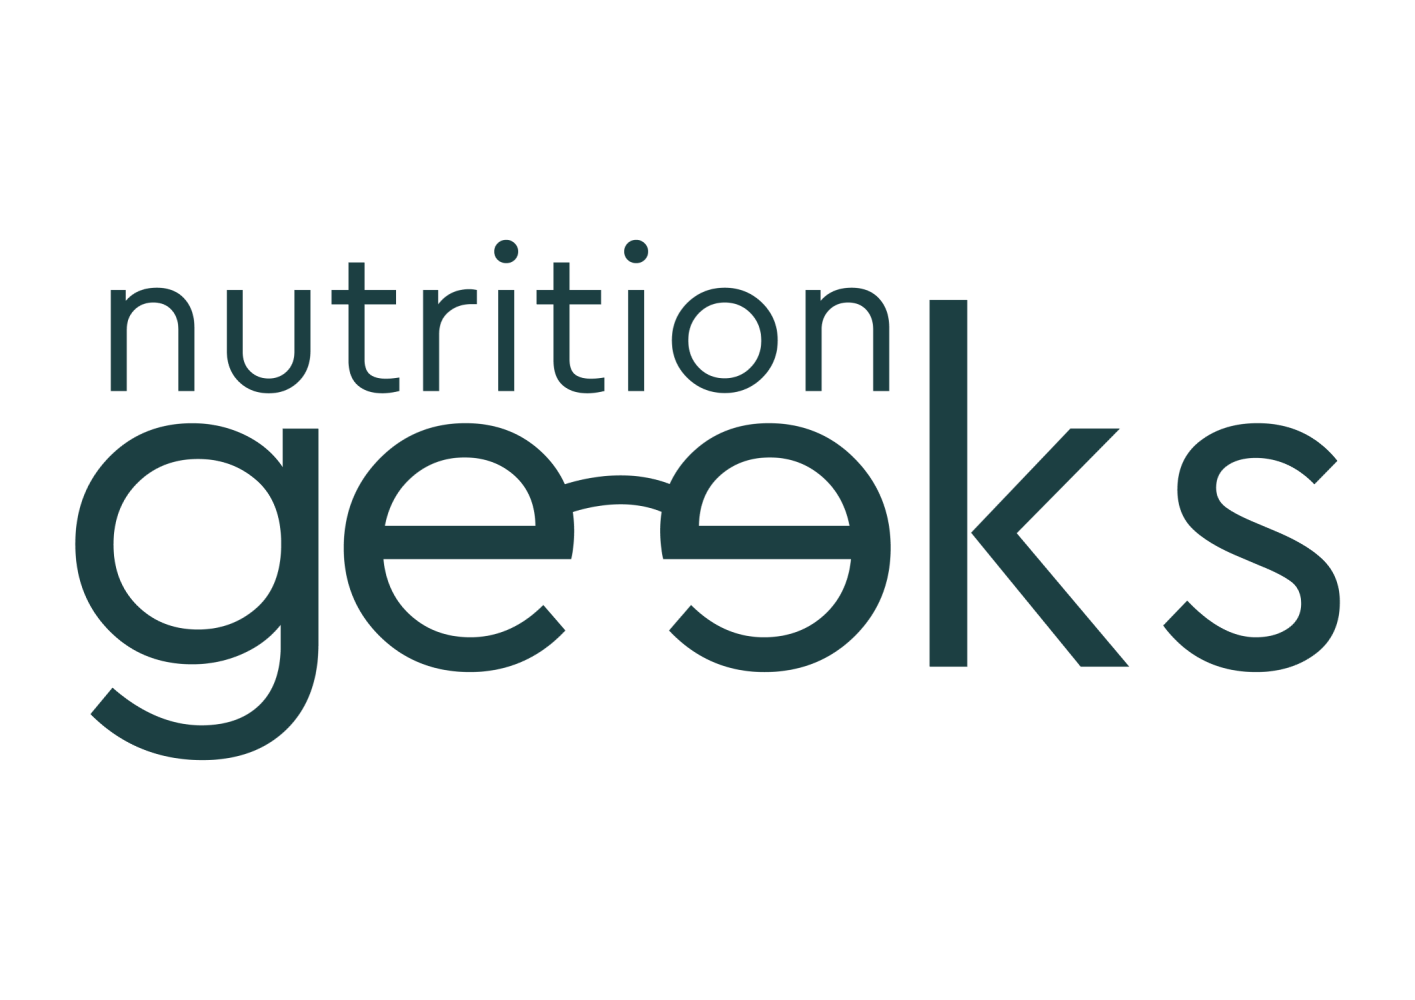 Nutrition Geeks Coupons